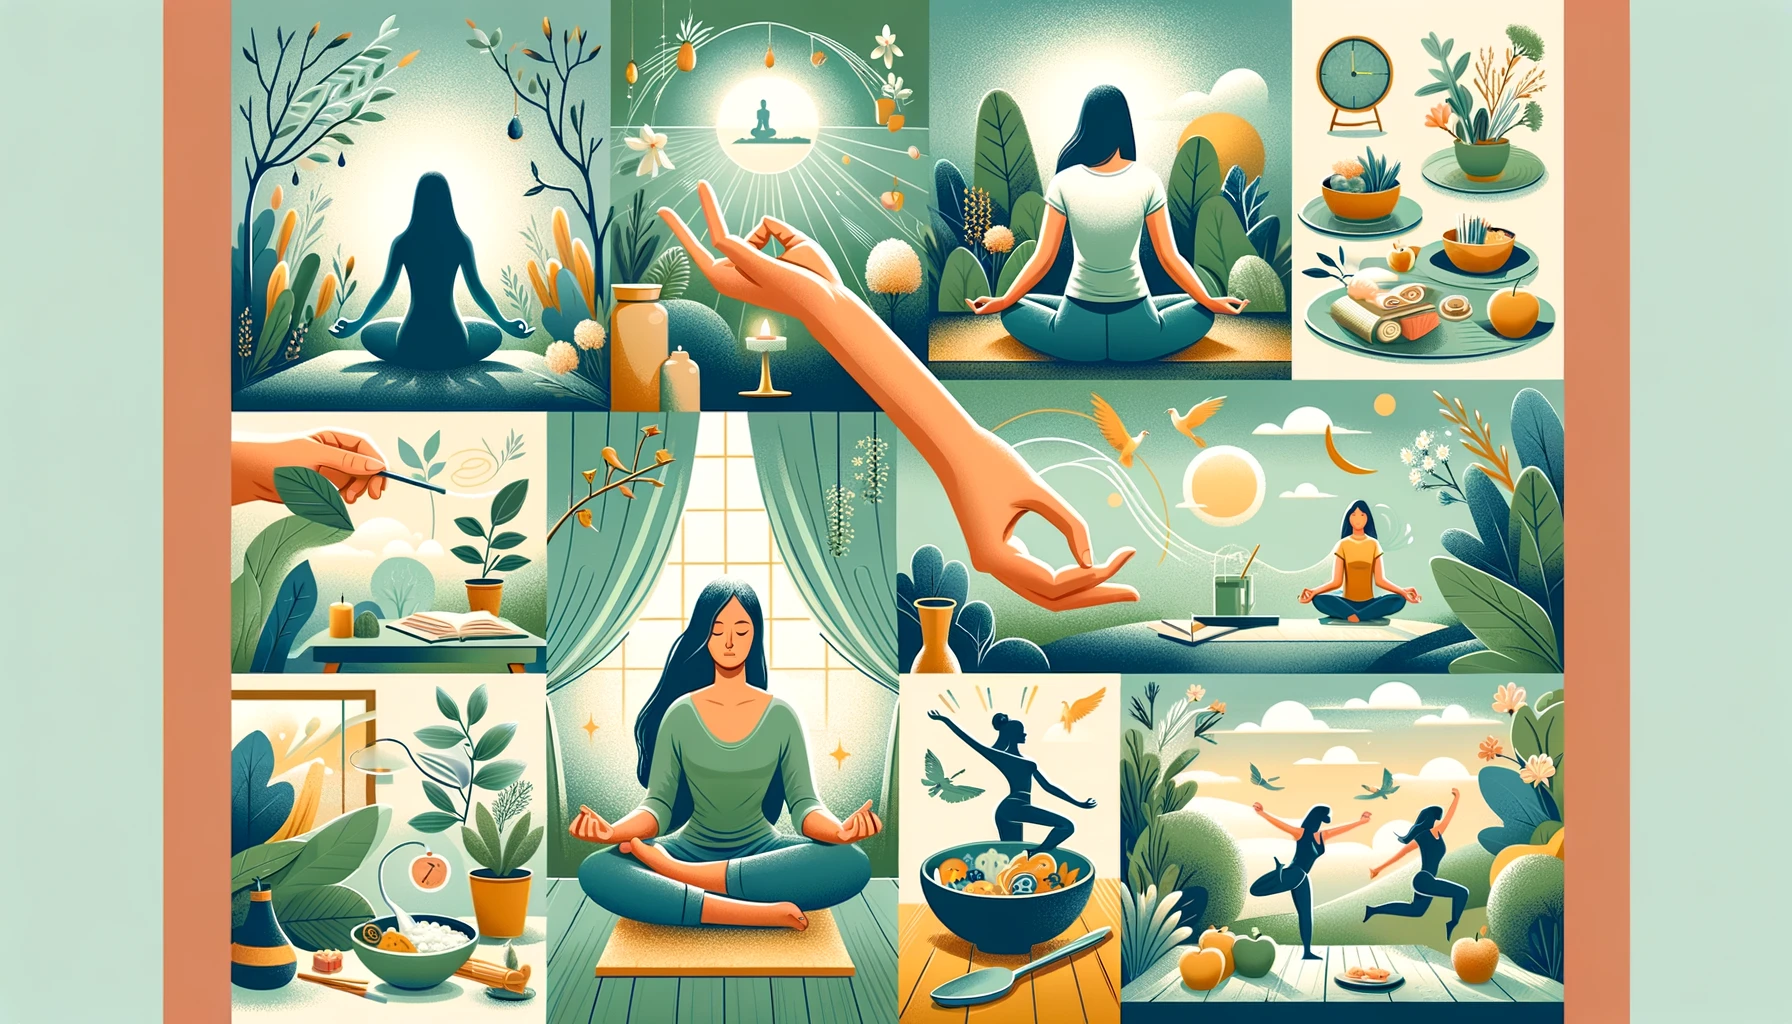 Is Mindfulness a Healthy Habit?